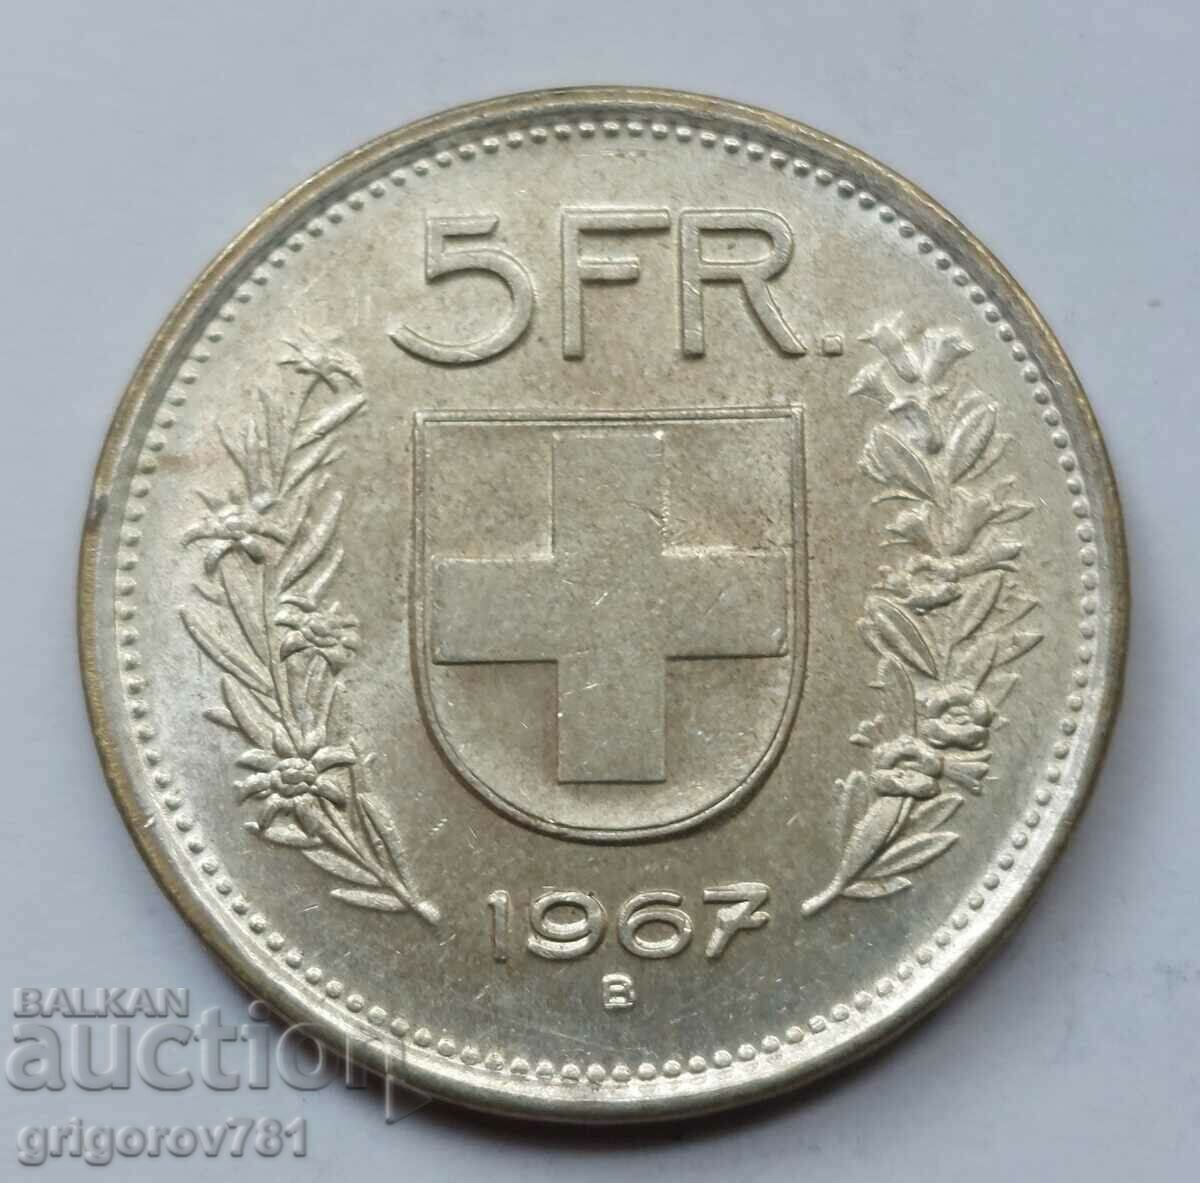 5 Francs Silver Switzerland 1967 B - Silver Coin #13